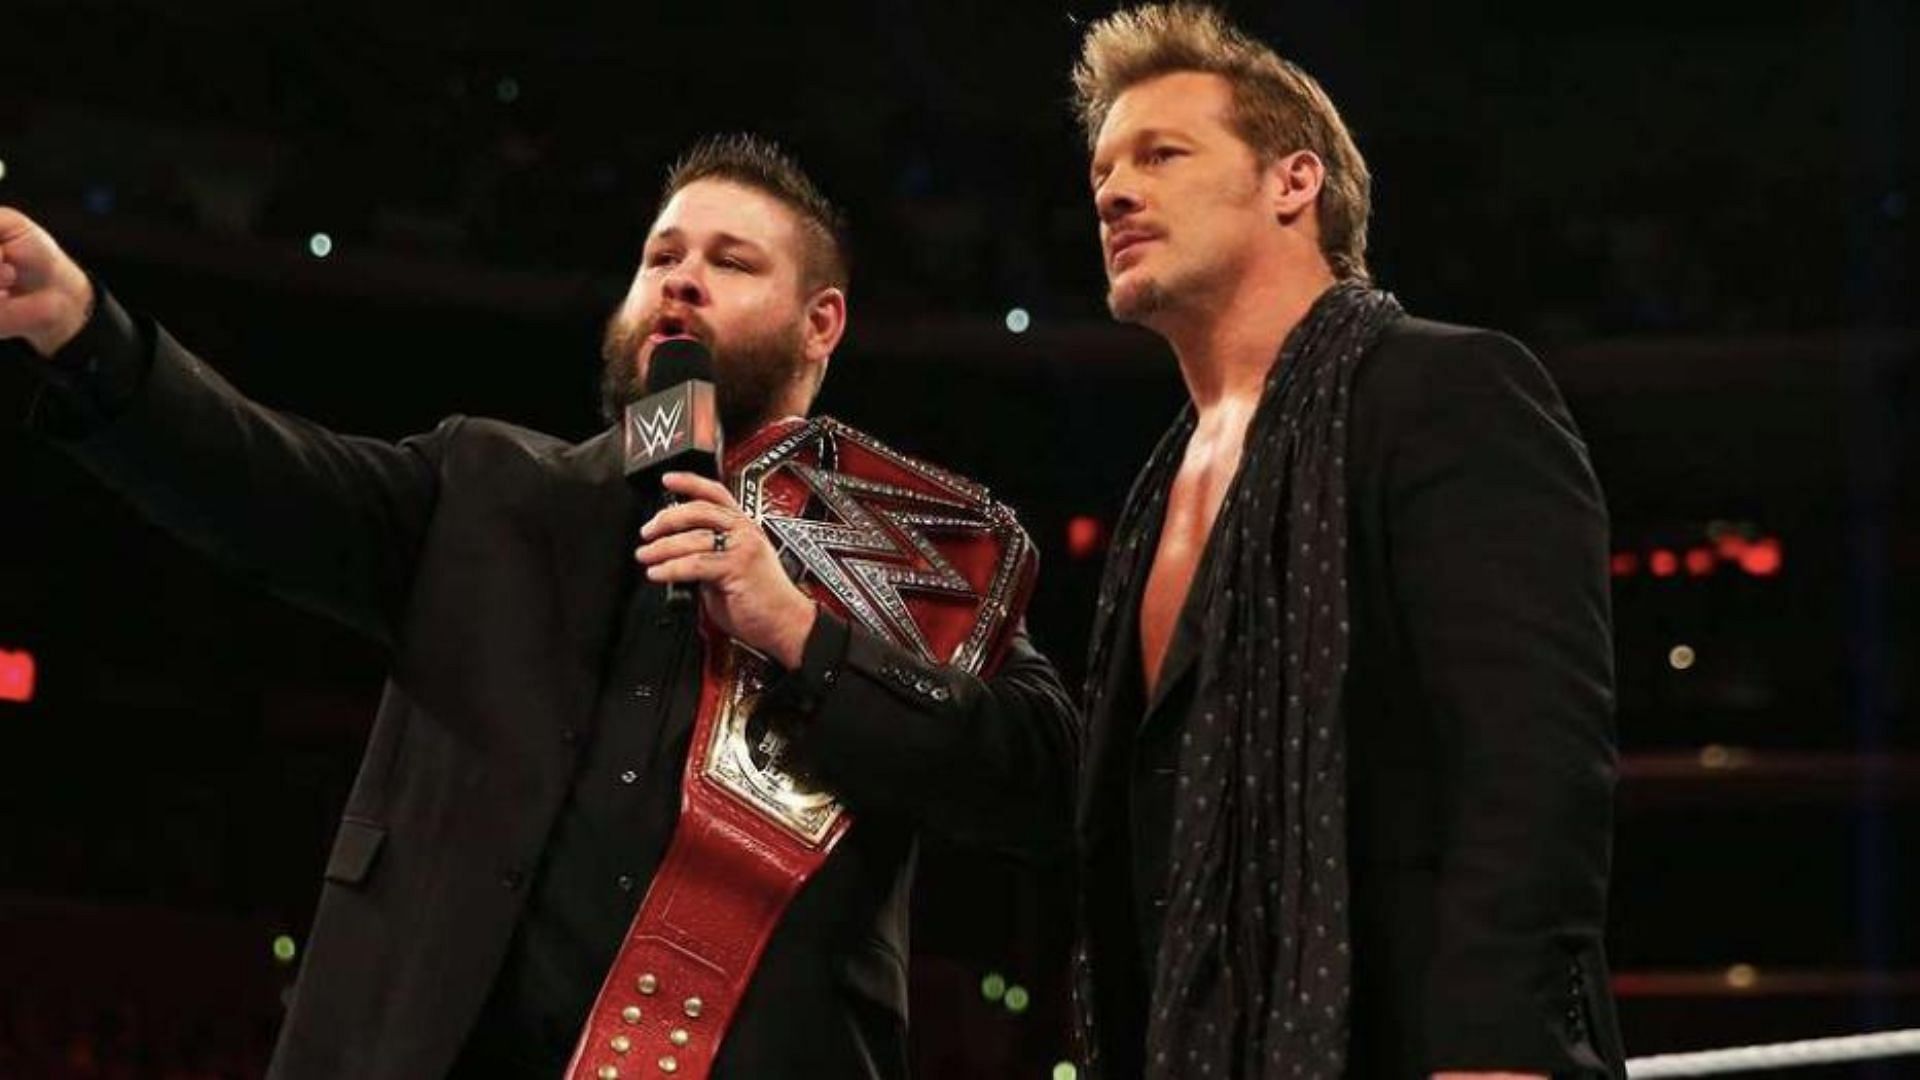 Which AEW stars did Kevin Owens tell Chris Jericho to hire?